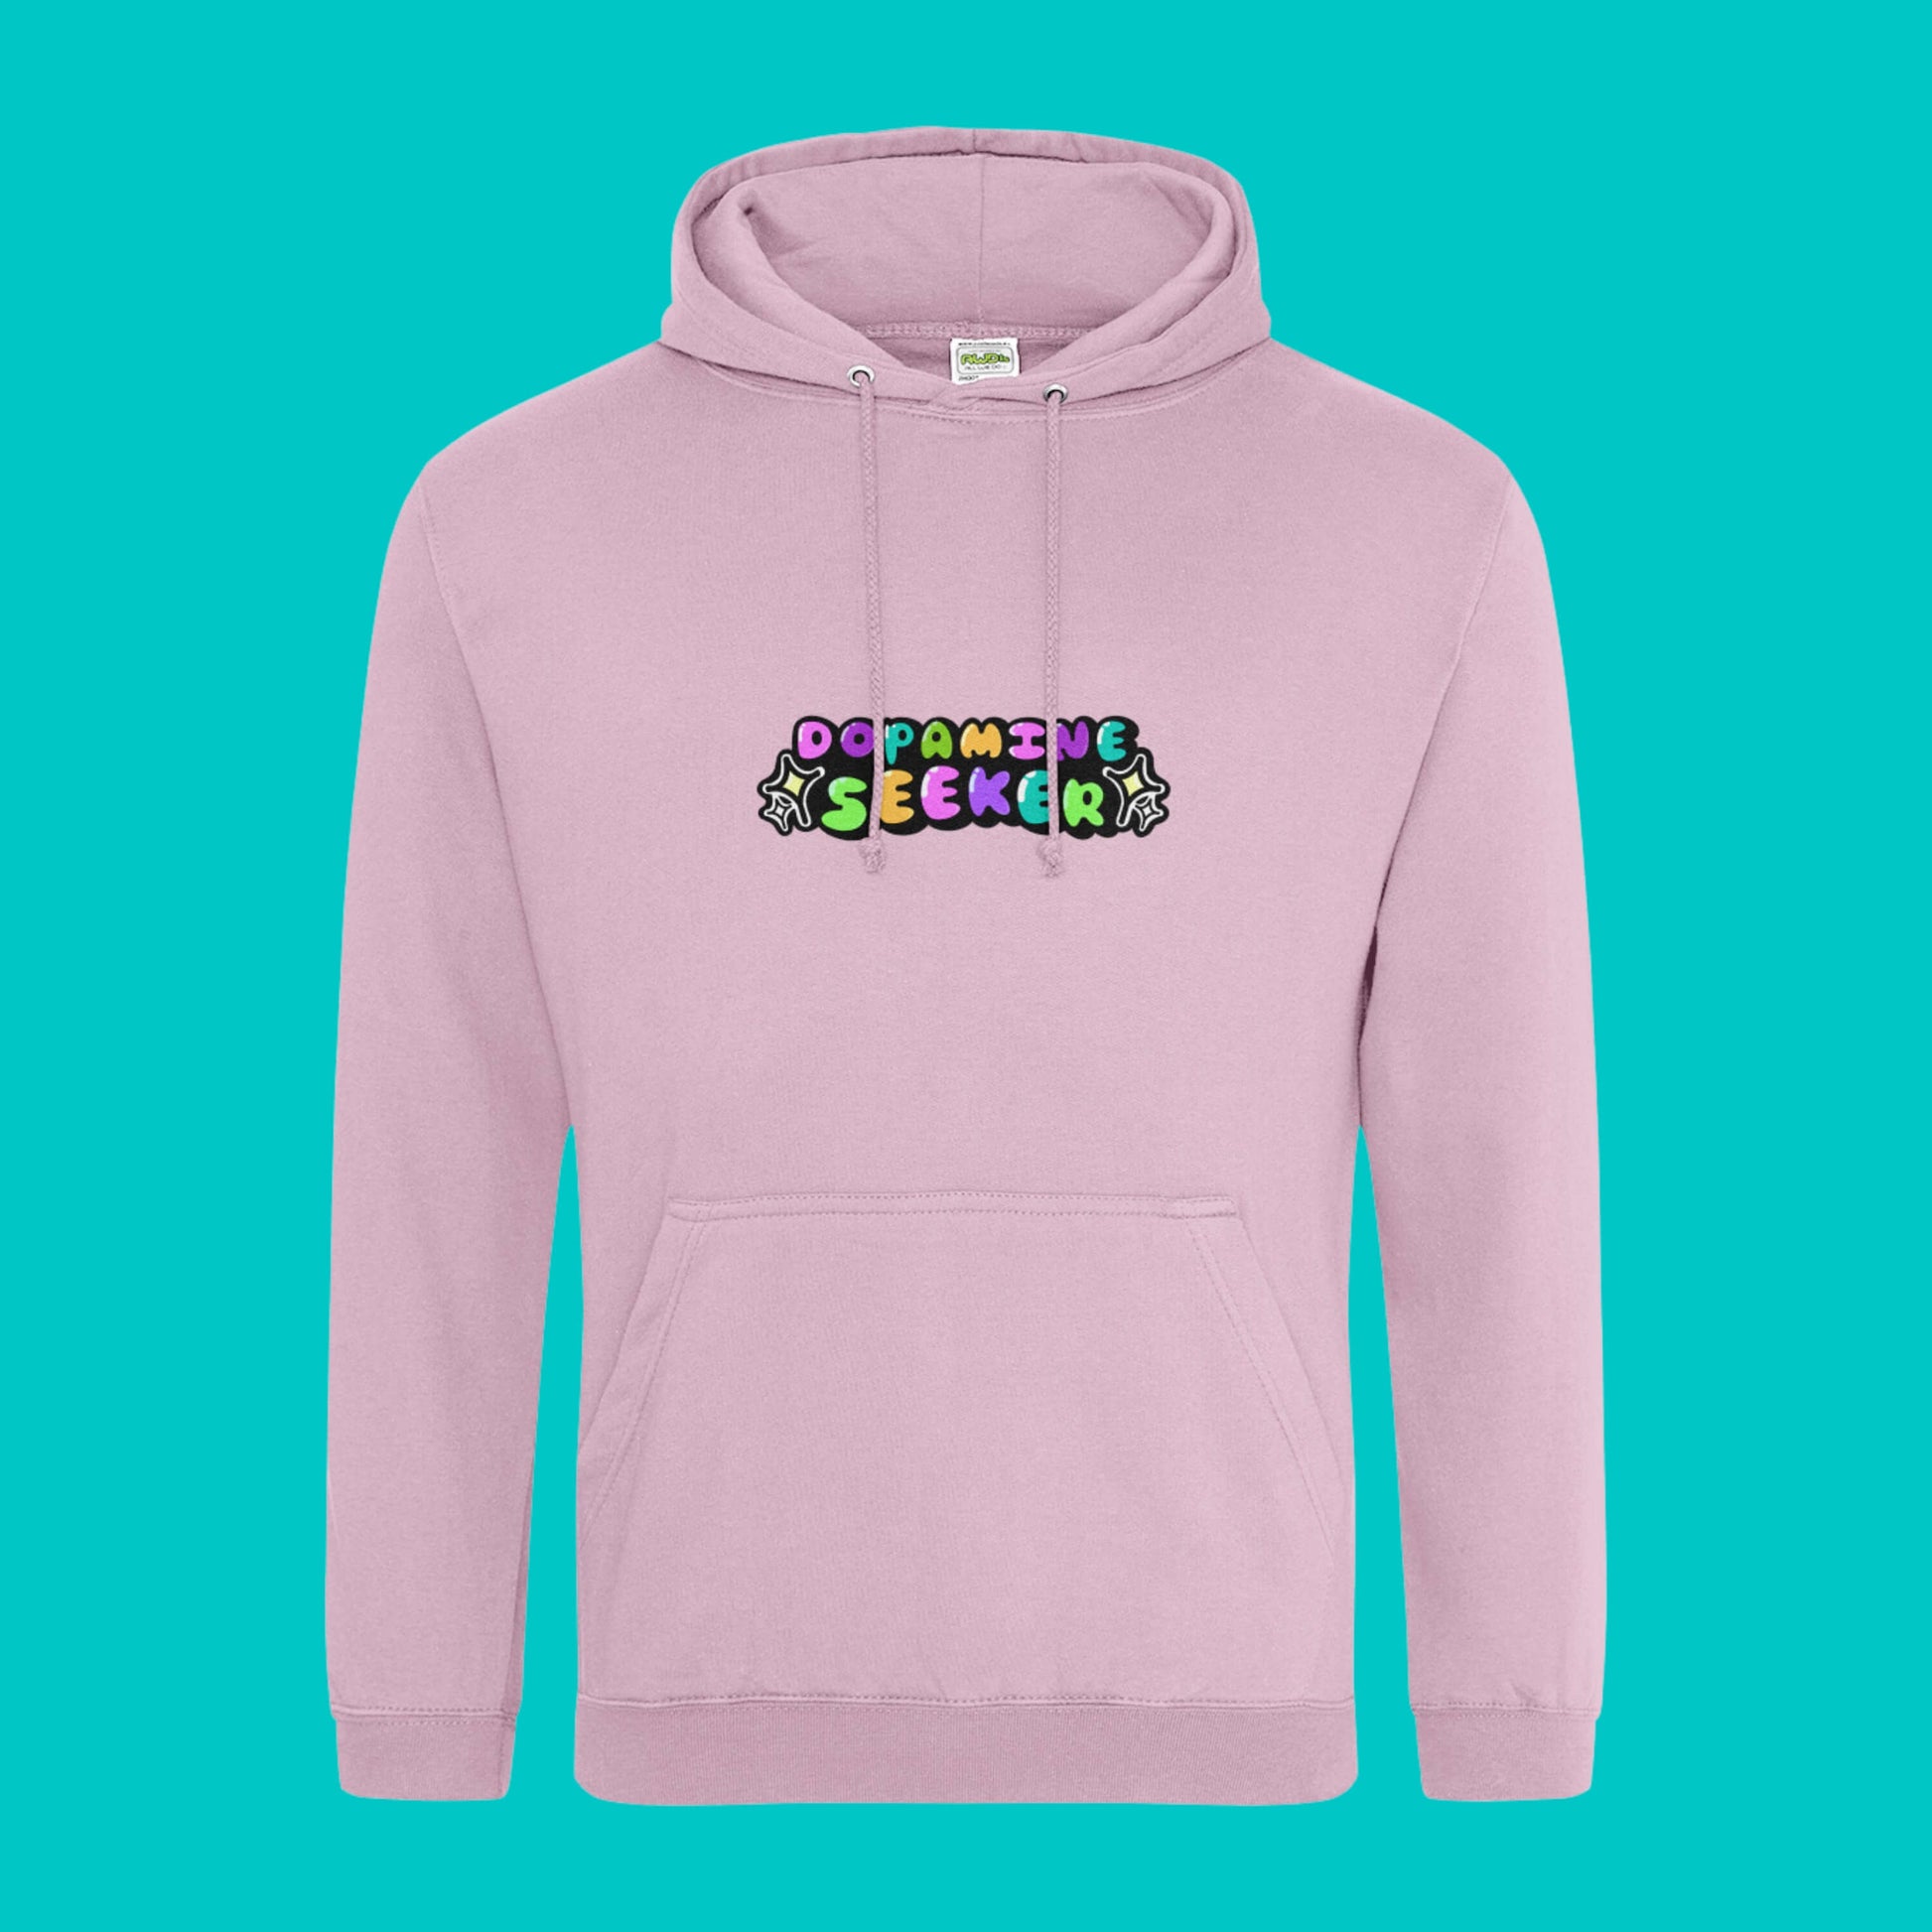 The Dopamine Seeker Hoodie in baby pink on a blue background. The hoodie design has 'dopamine seeker' written in the middle in rainbow bubble font and black sparkle outlines. The hoodie has pastel pink drawstrings and a large centre pocket. Design is raising awareness for ADHD and neurodivergence.